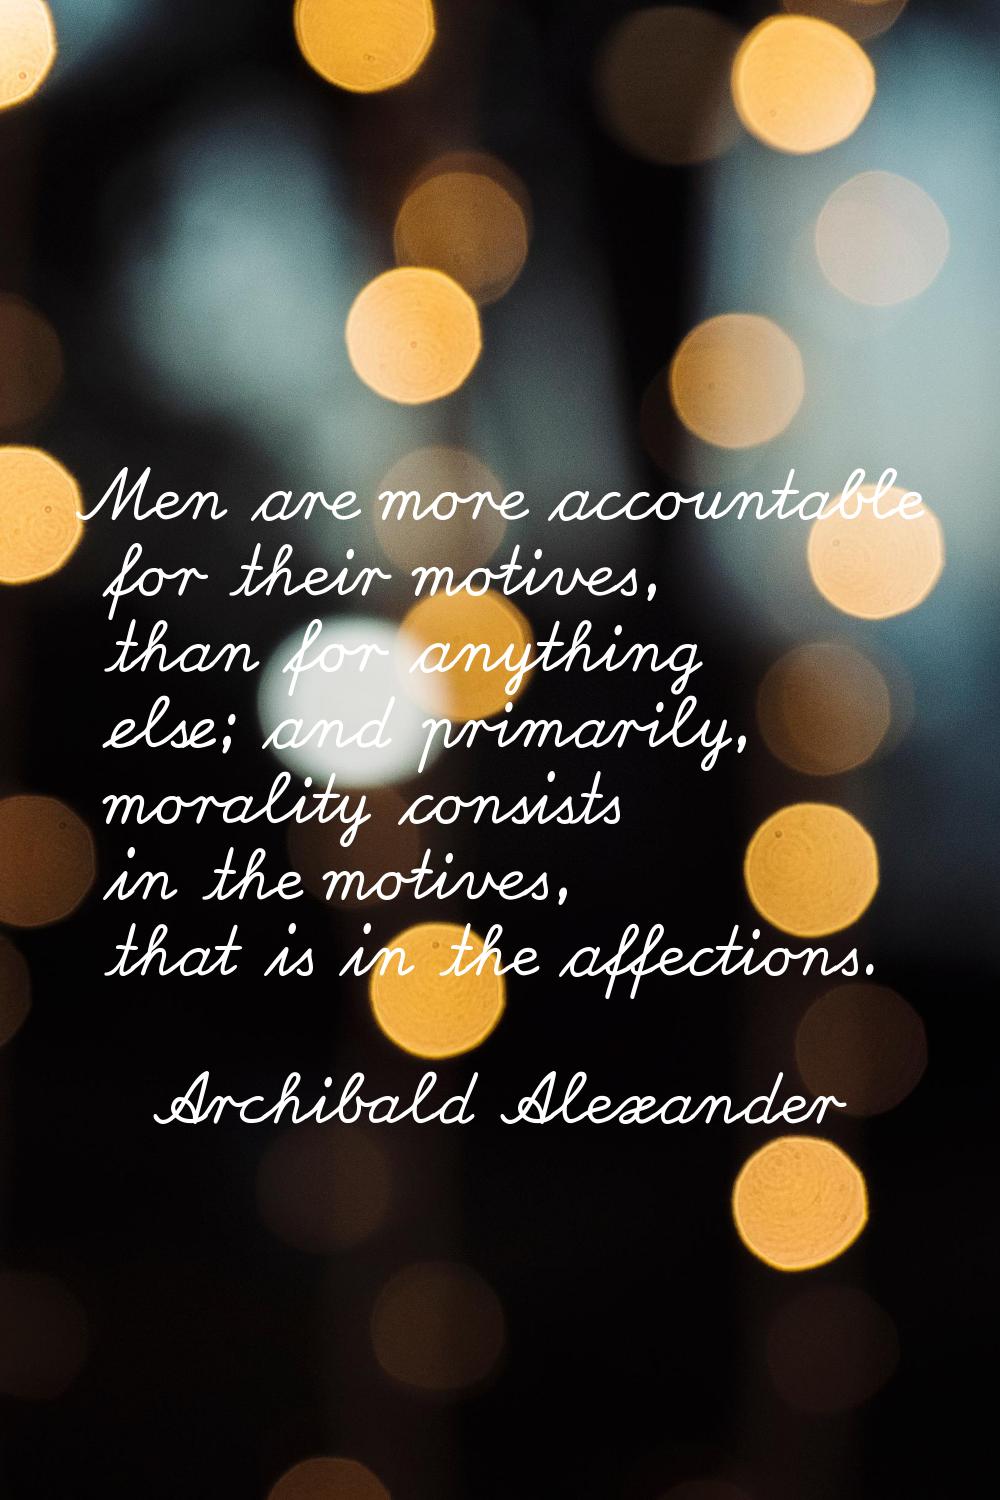 Men are more accountable for their motives, than for anything else; and primarily, morality consist